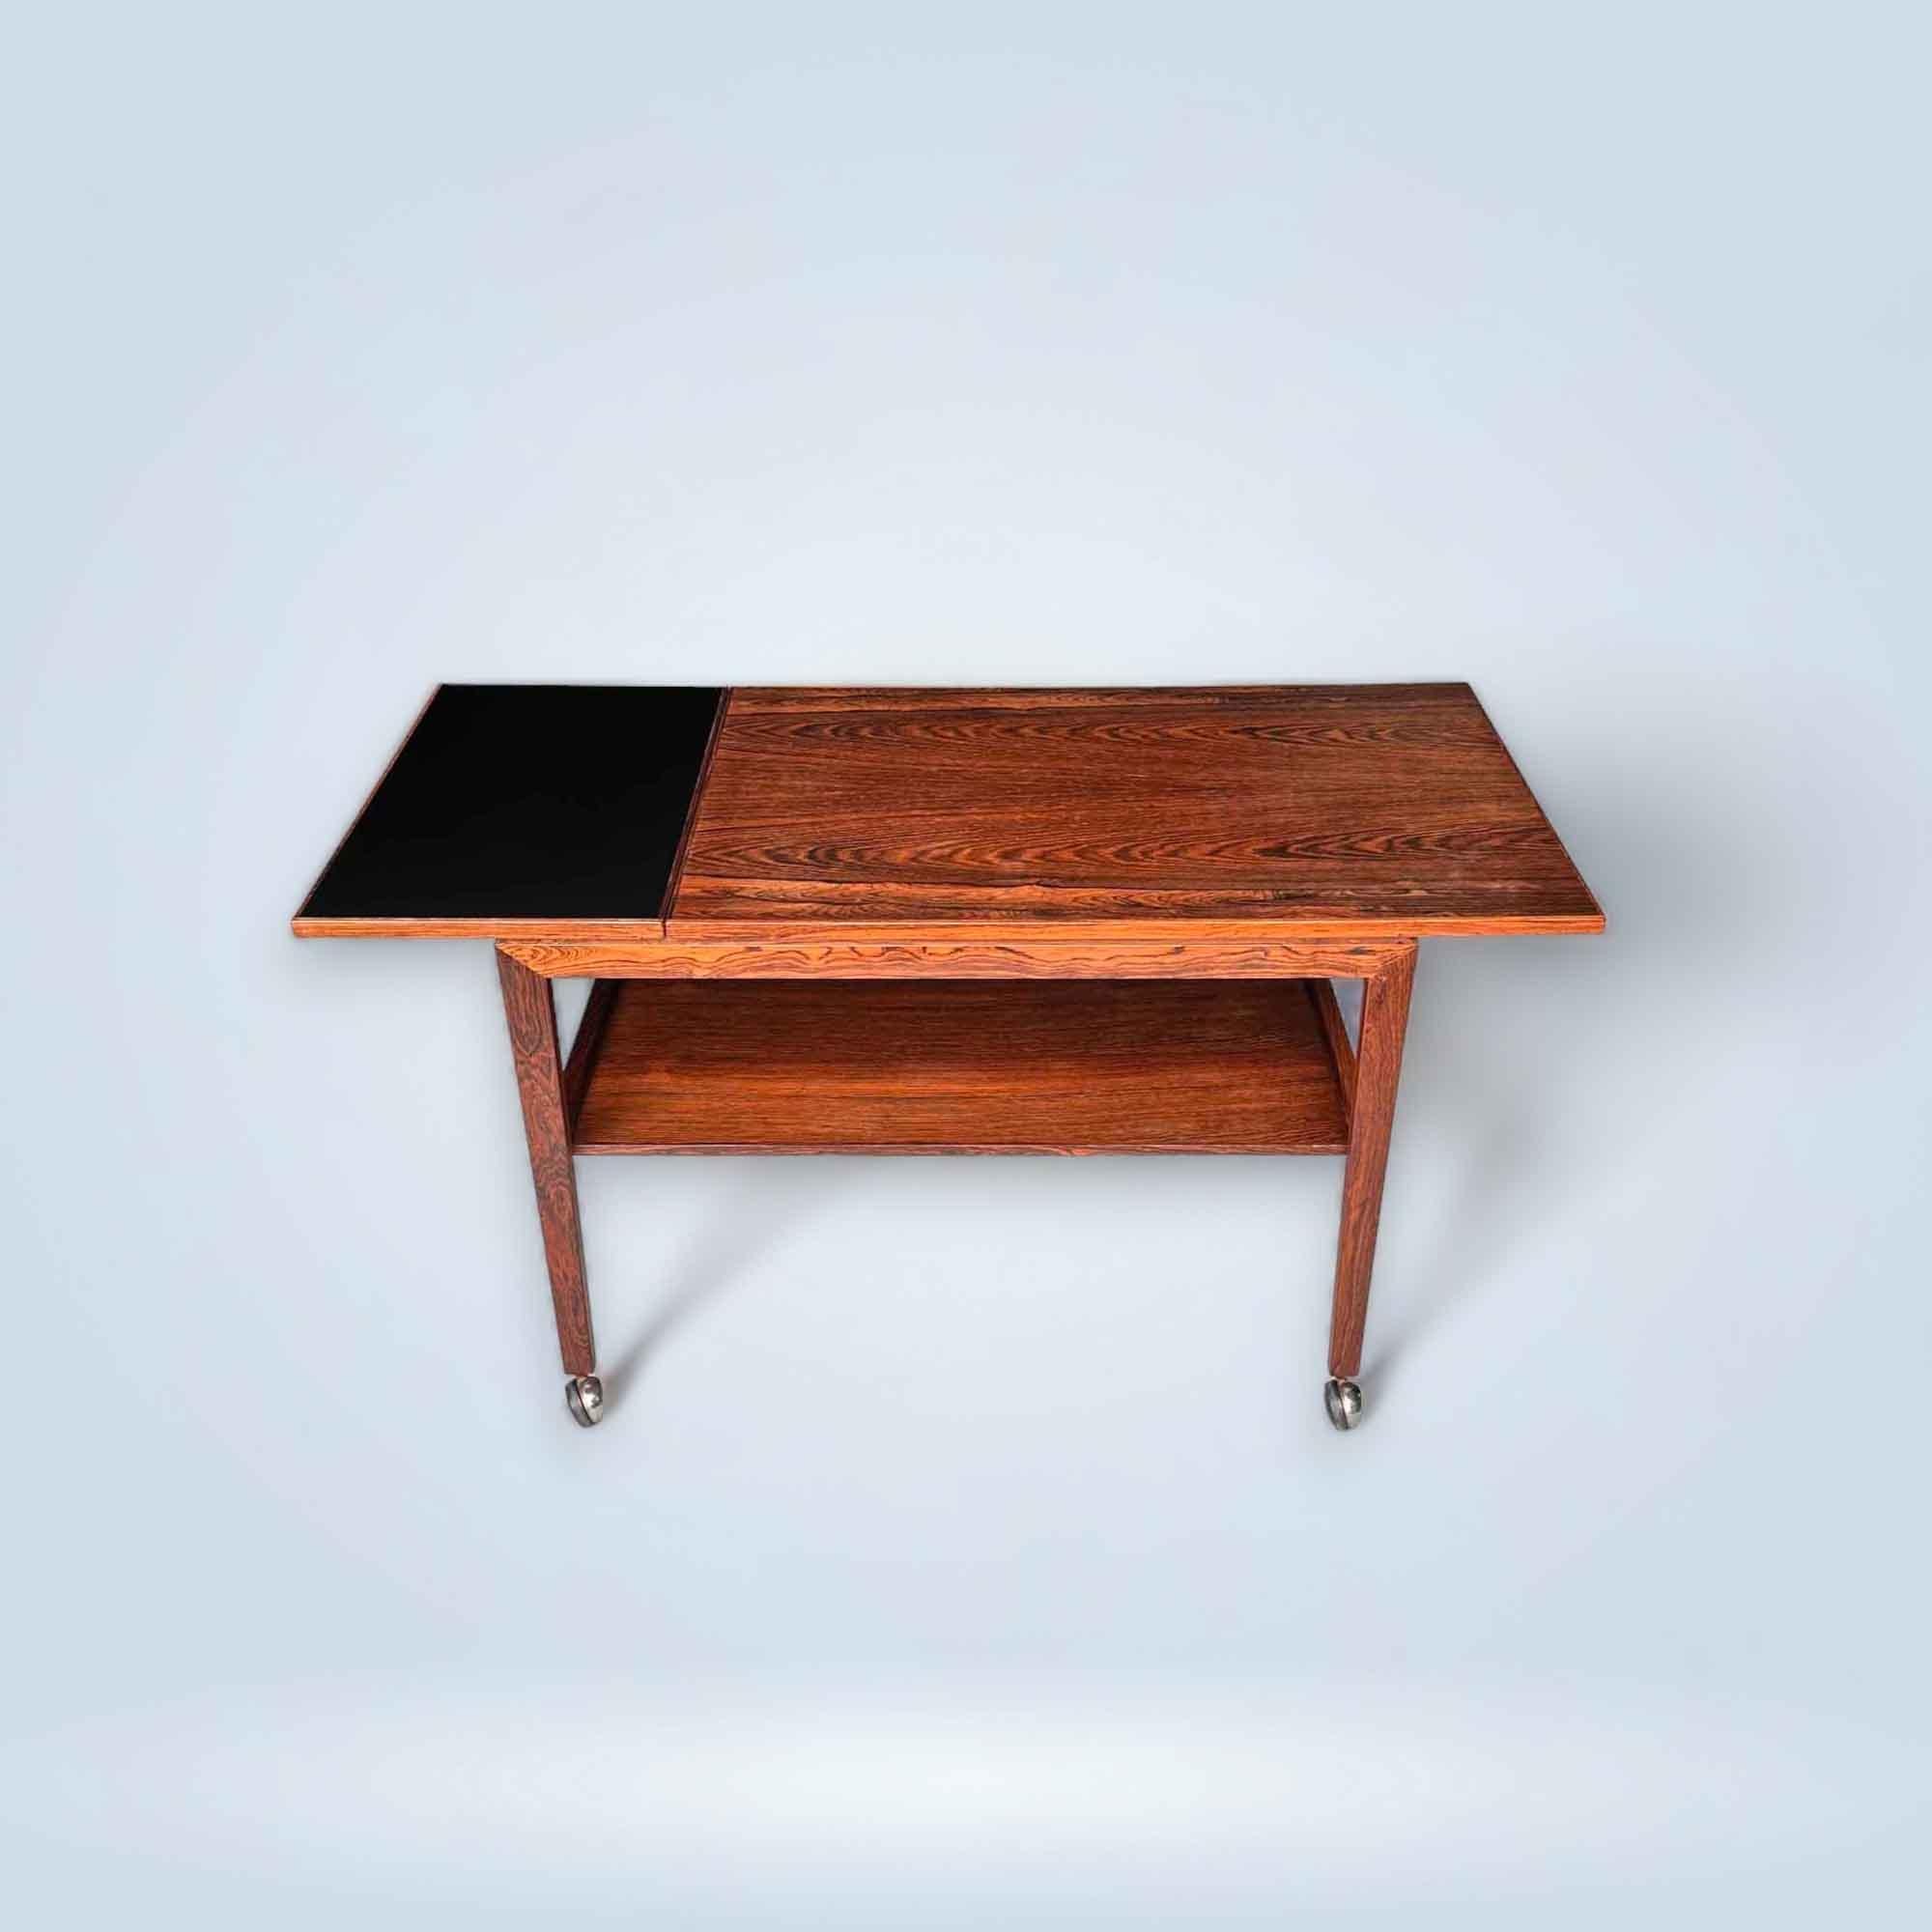 Beautiful Danish trolley designed by Juul Kristensen in the 1960s. The table is made of rosewood, has a black pull-out top, and 4 wheels. With a Danish label at the bottom.

Denmark, 1960s

Designer/Manufacturer: Juul Kristensen

Excellent